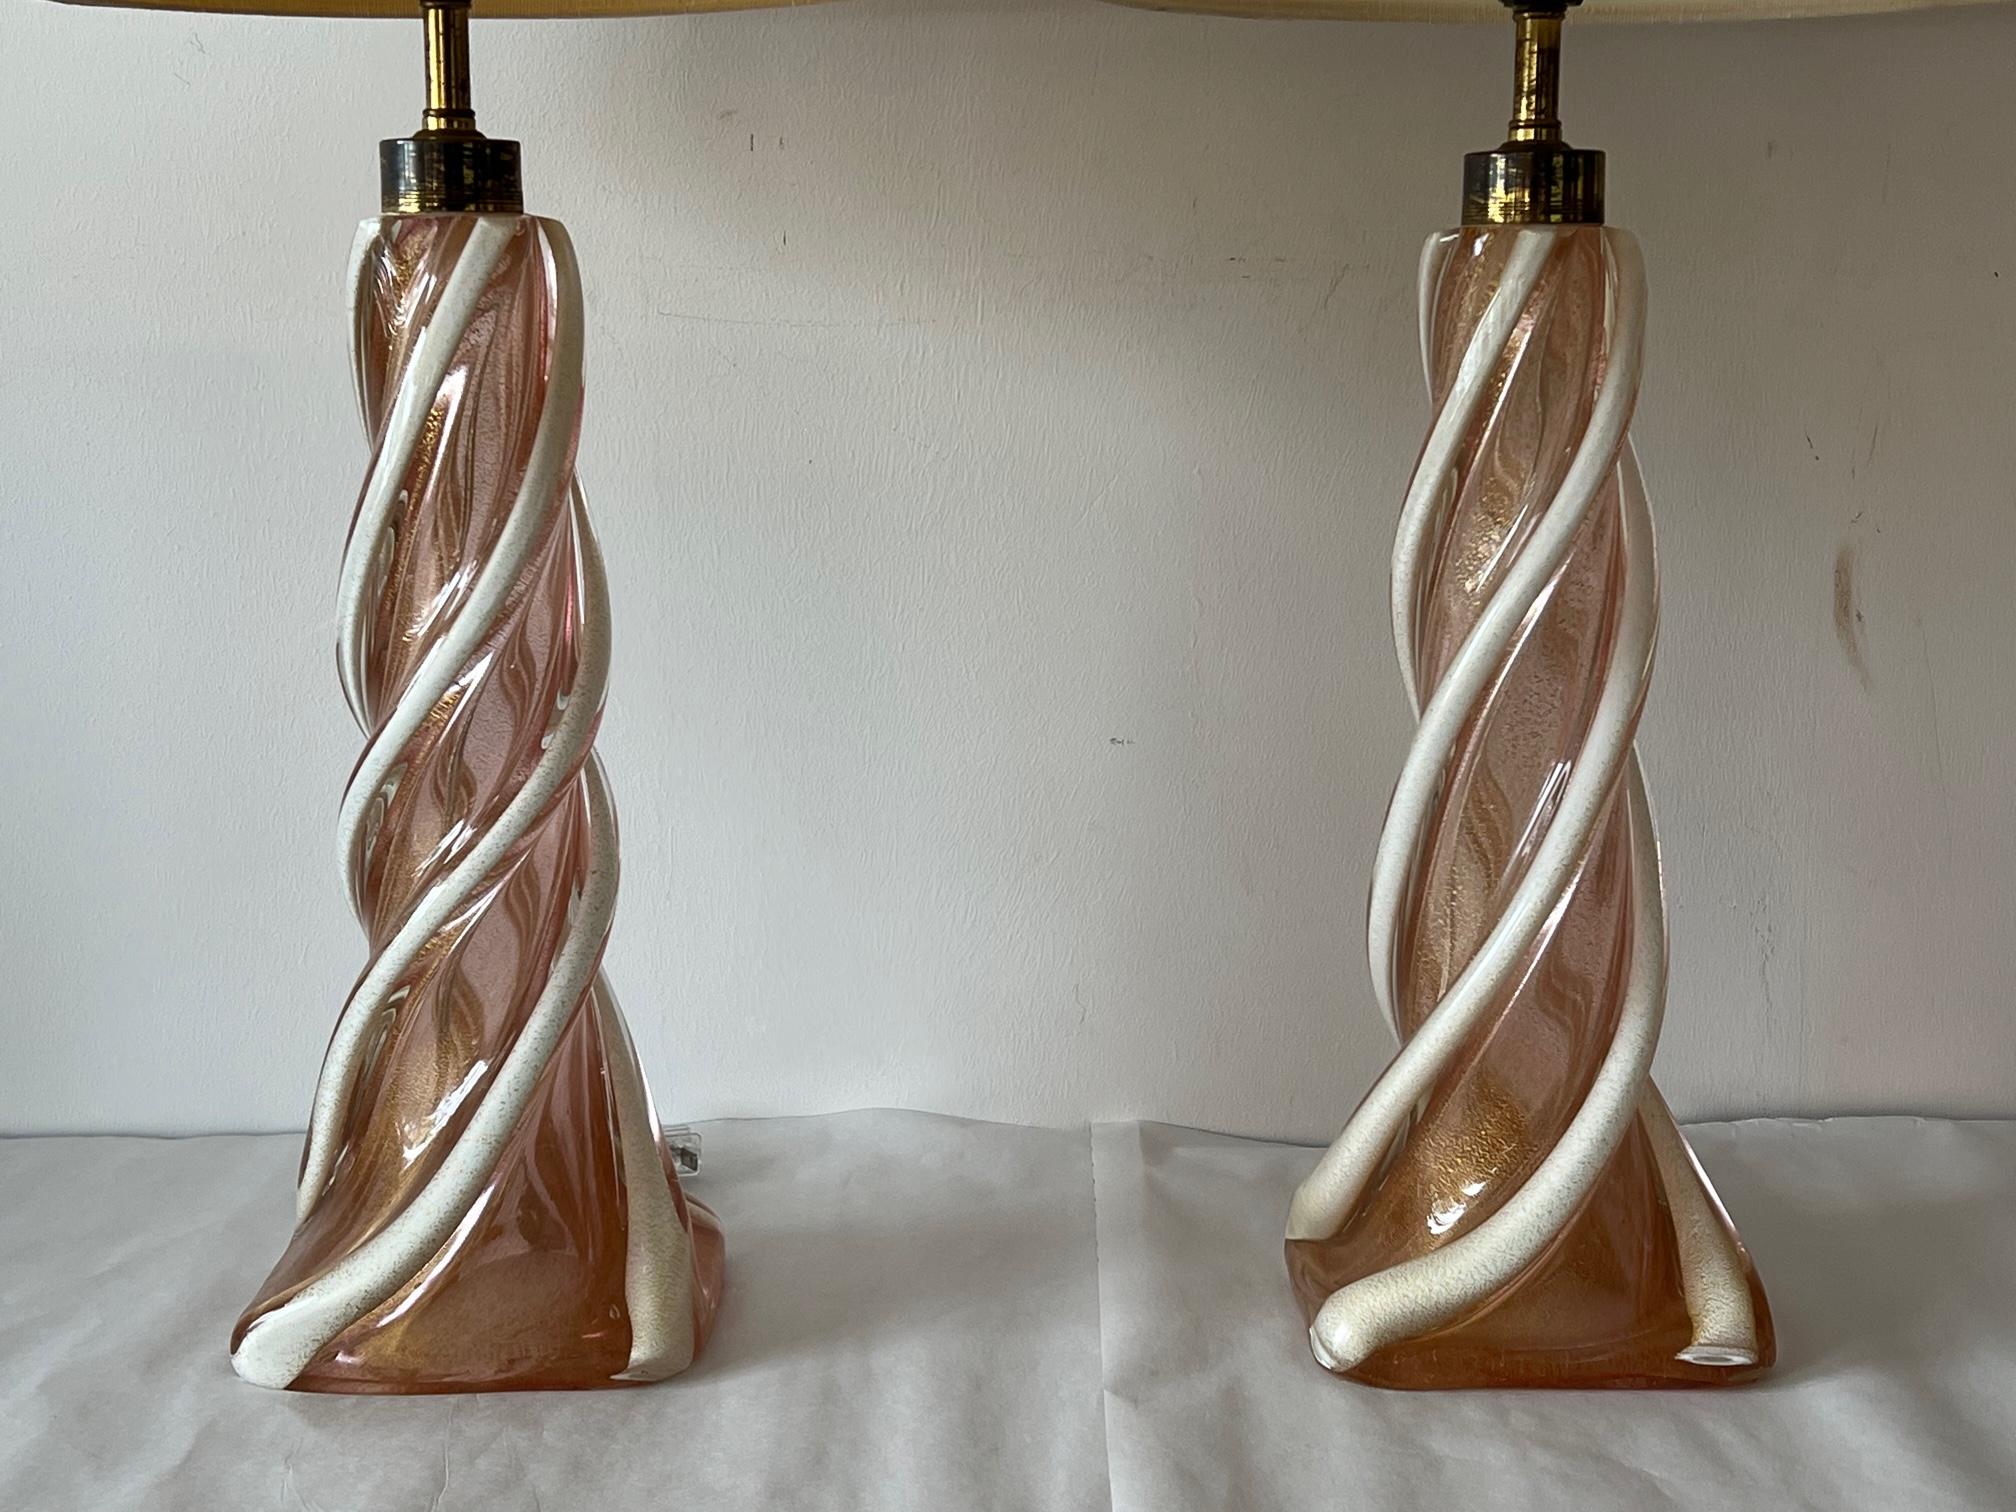 A pair of outstanding Murano lamps probably by Seguso. Heavy, with twisted cased glass decoration and gold flecks inside. 